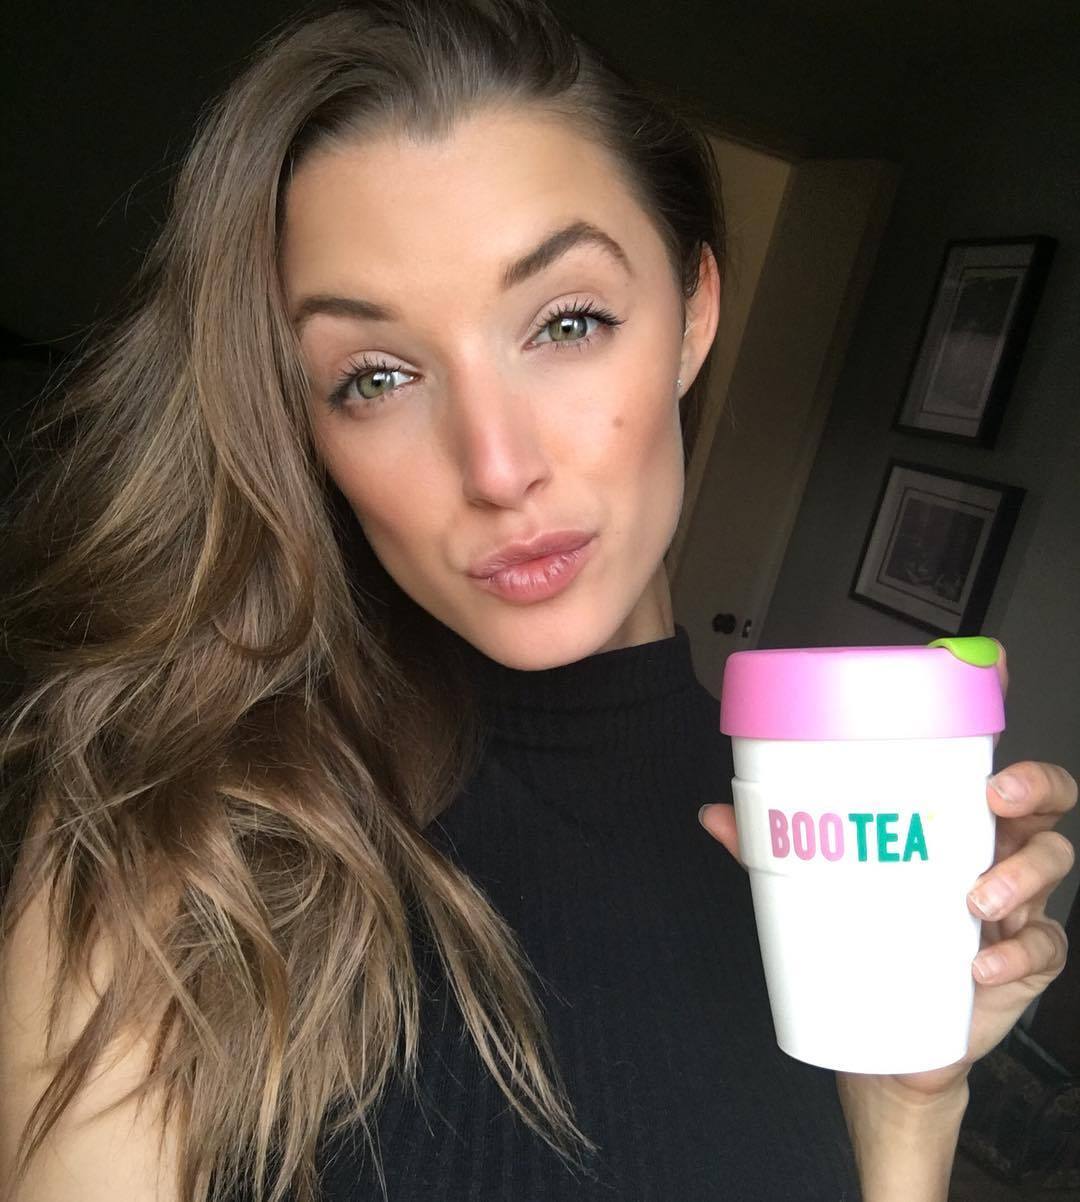 Thank you @bootea_uk for my package! Loving my cup and 14 day Teatox care package.